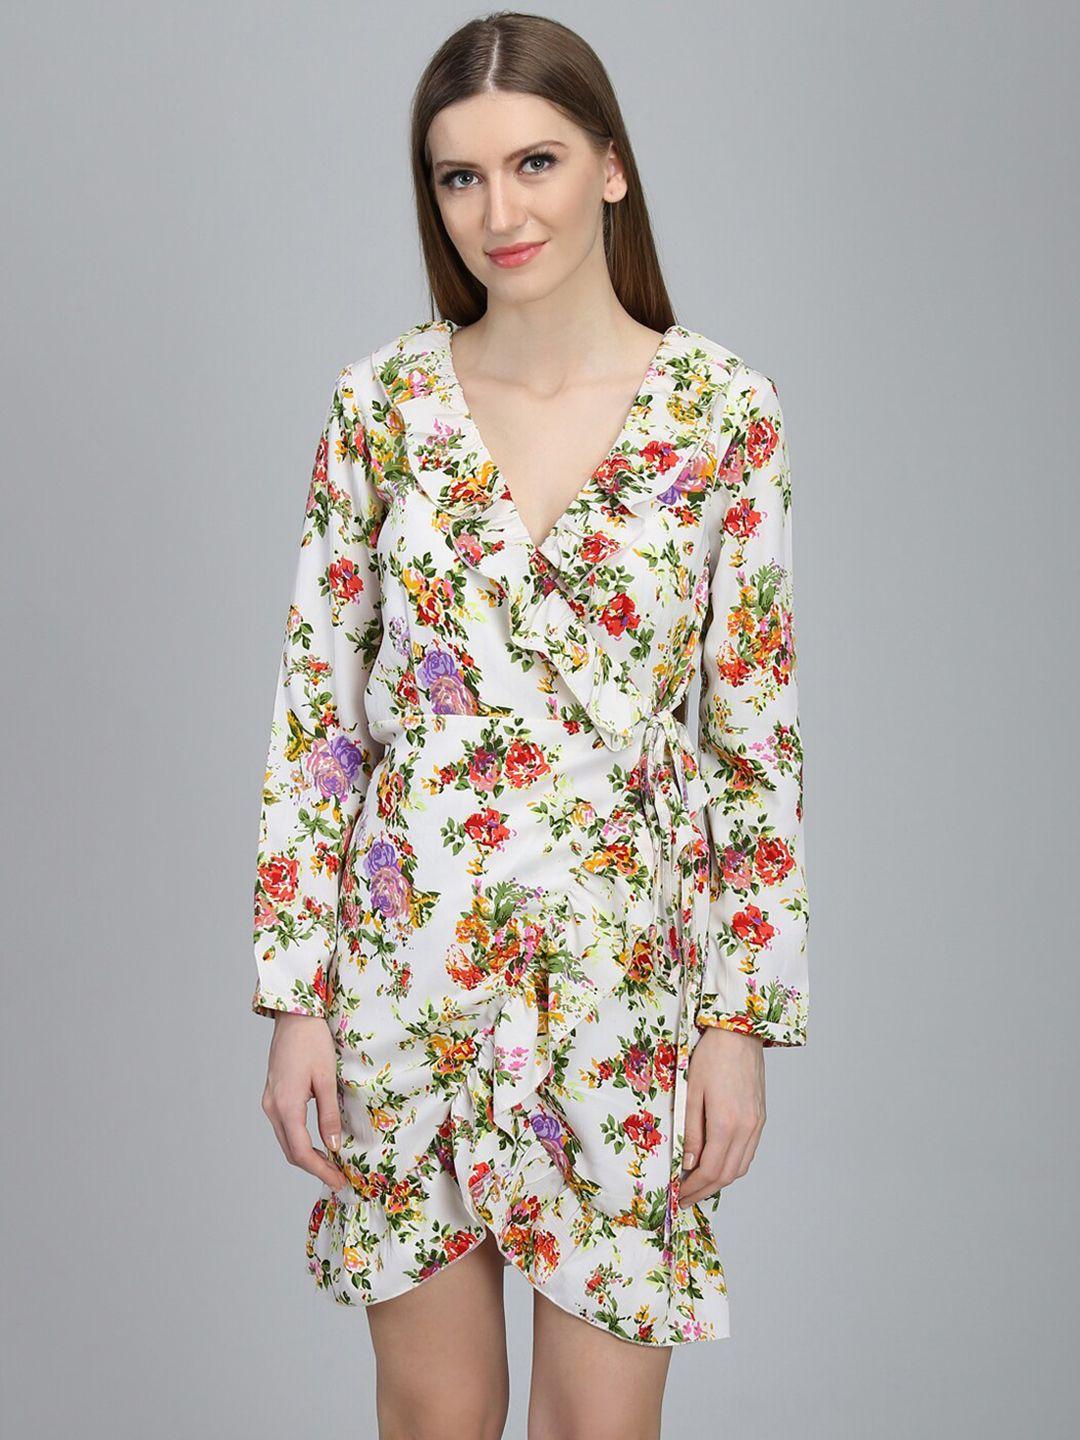 dodo & moa off white & red floral crepe wrap ruffled dress